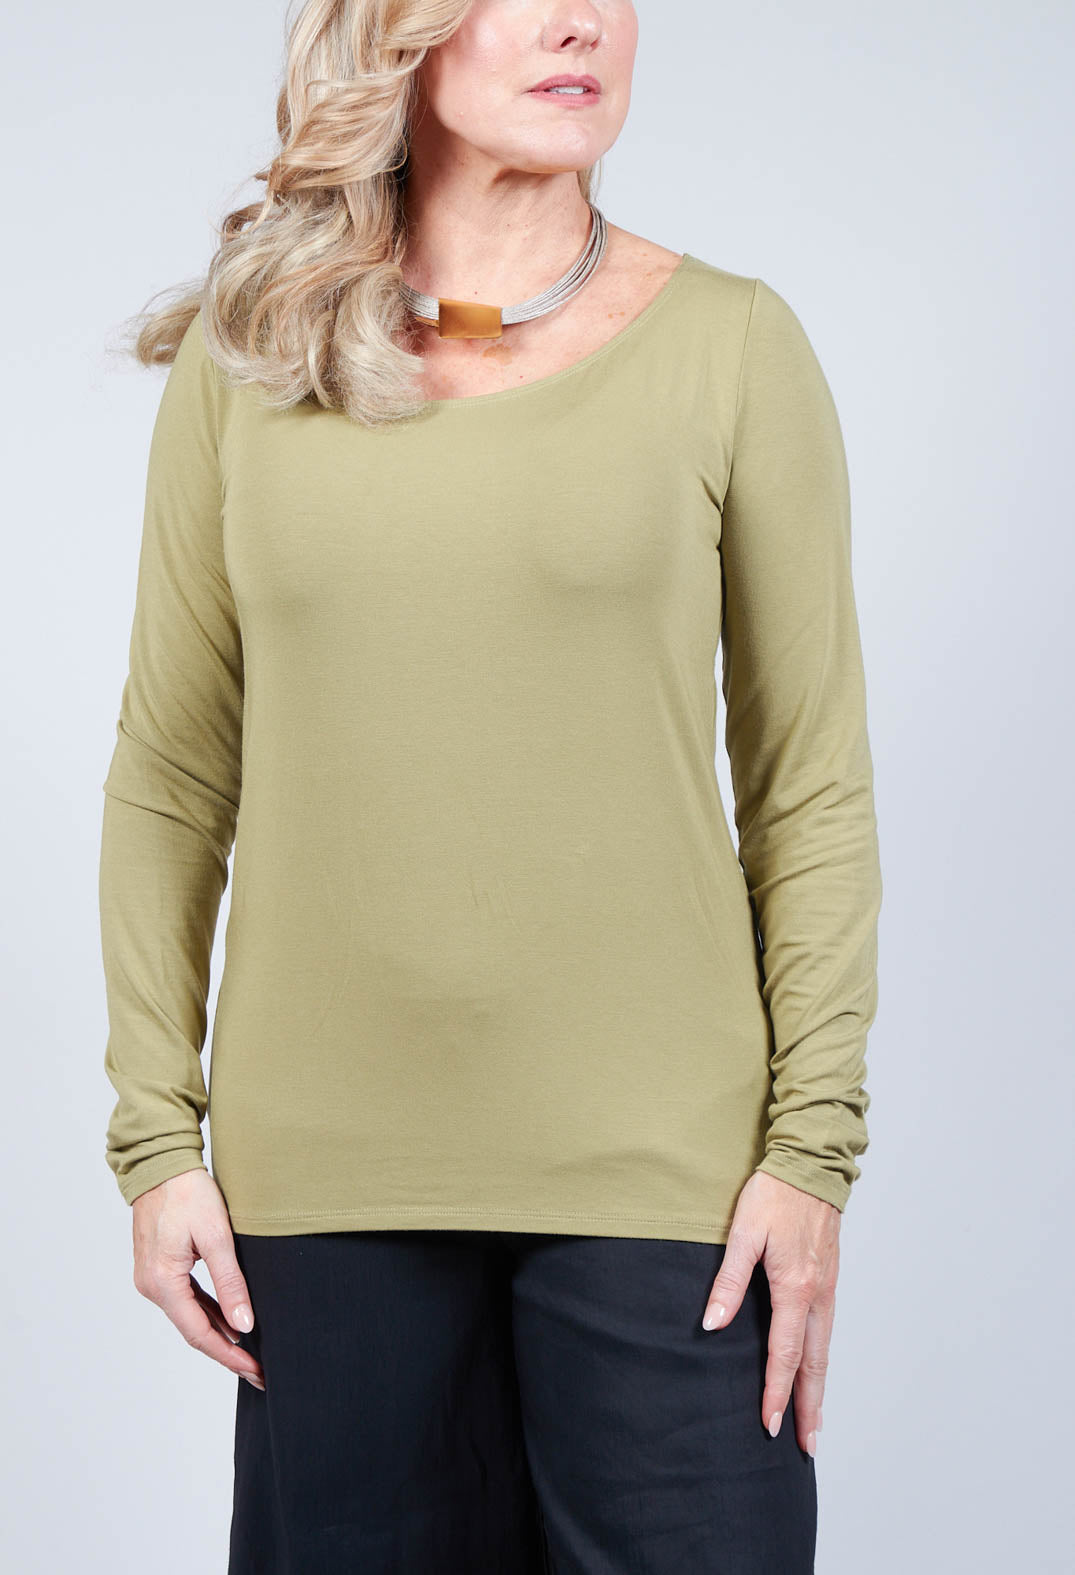 Zoe T-Shirt in Olive Green